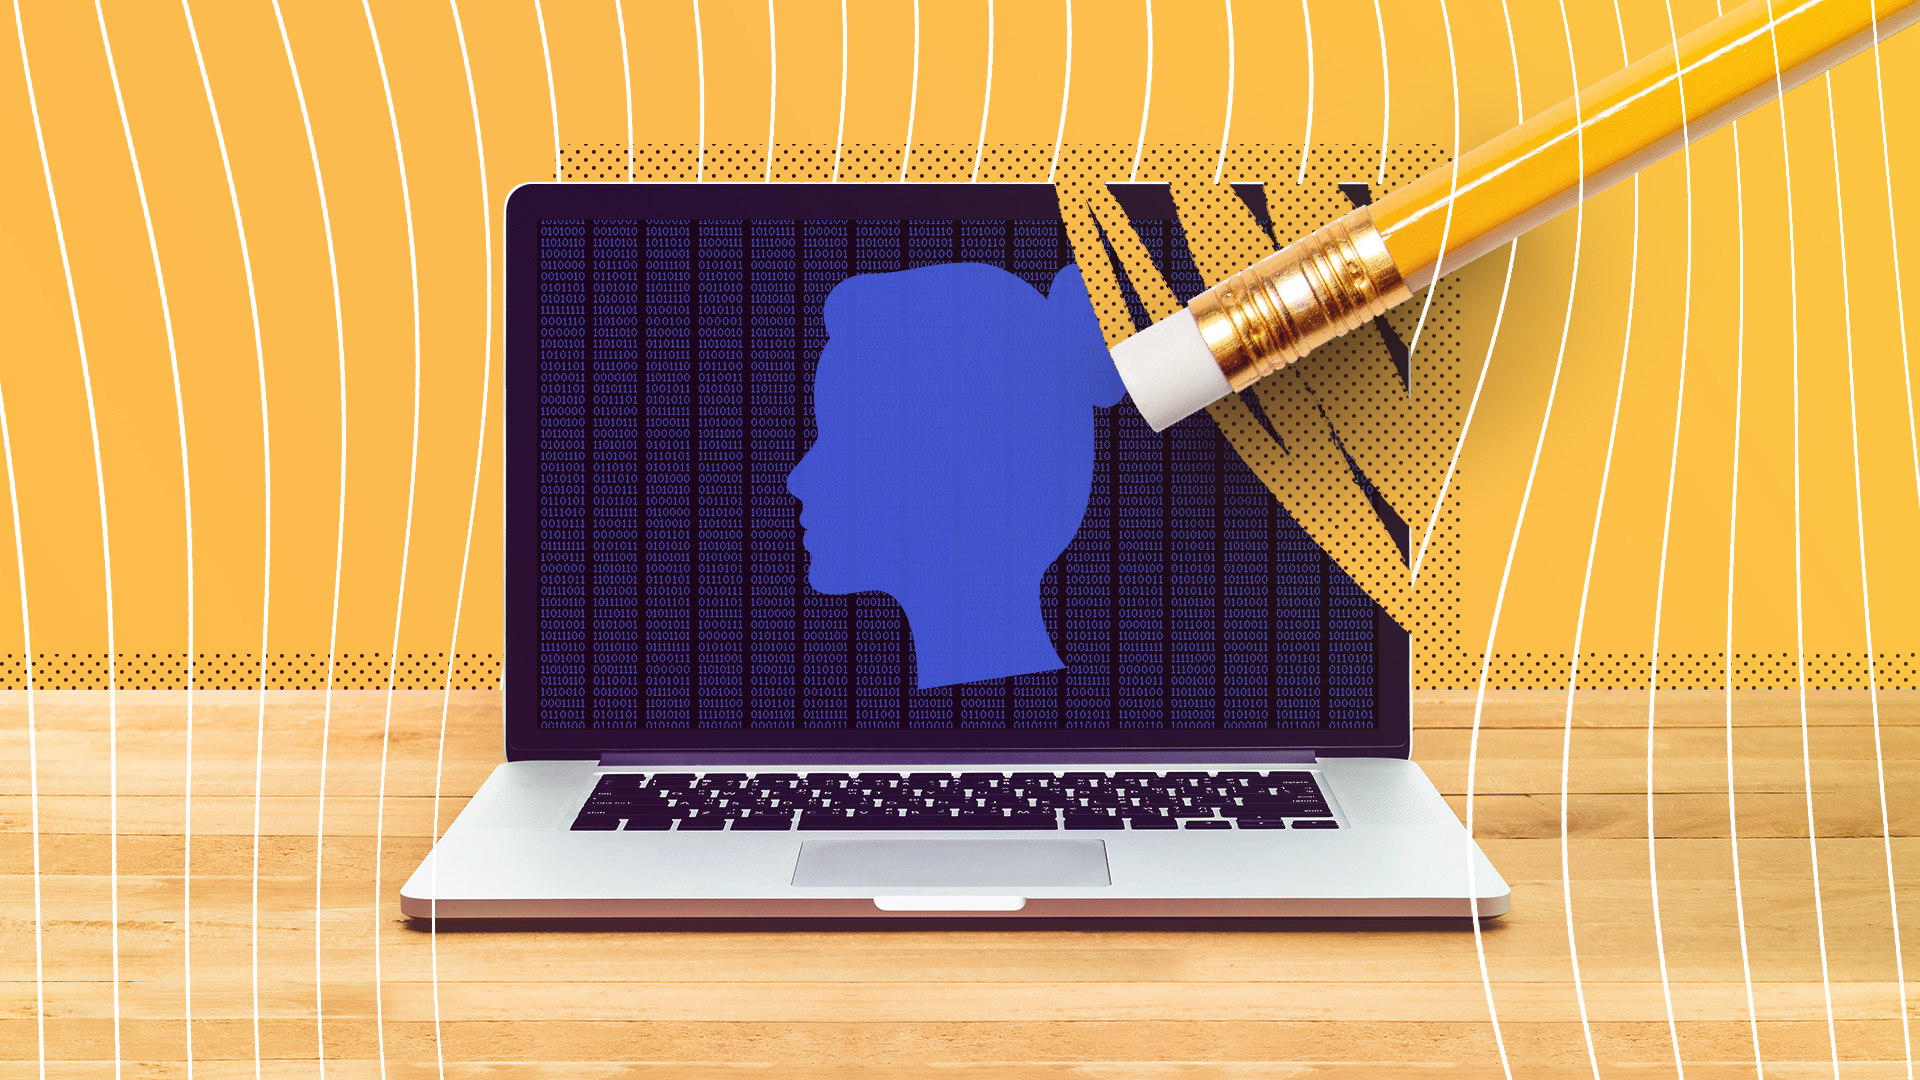 Illustration of a laptop that has the silhouette of a woman on it being erased by a pencil.